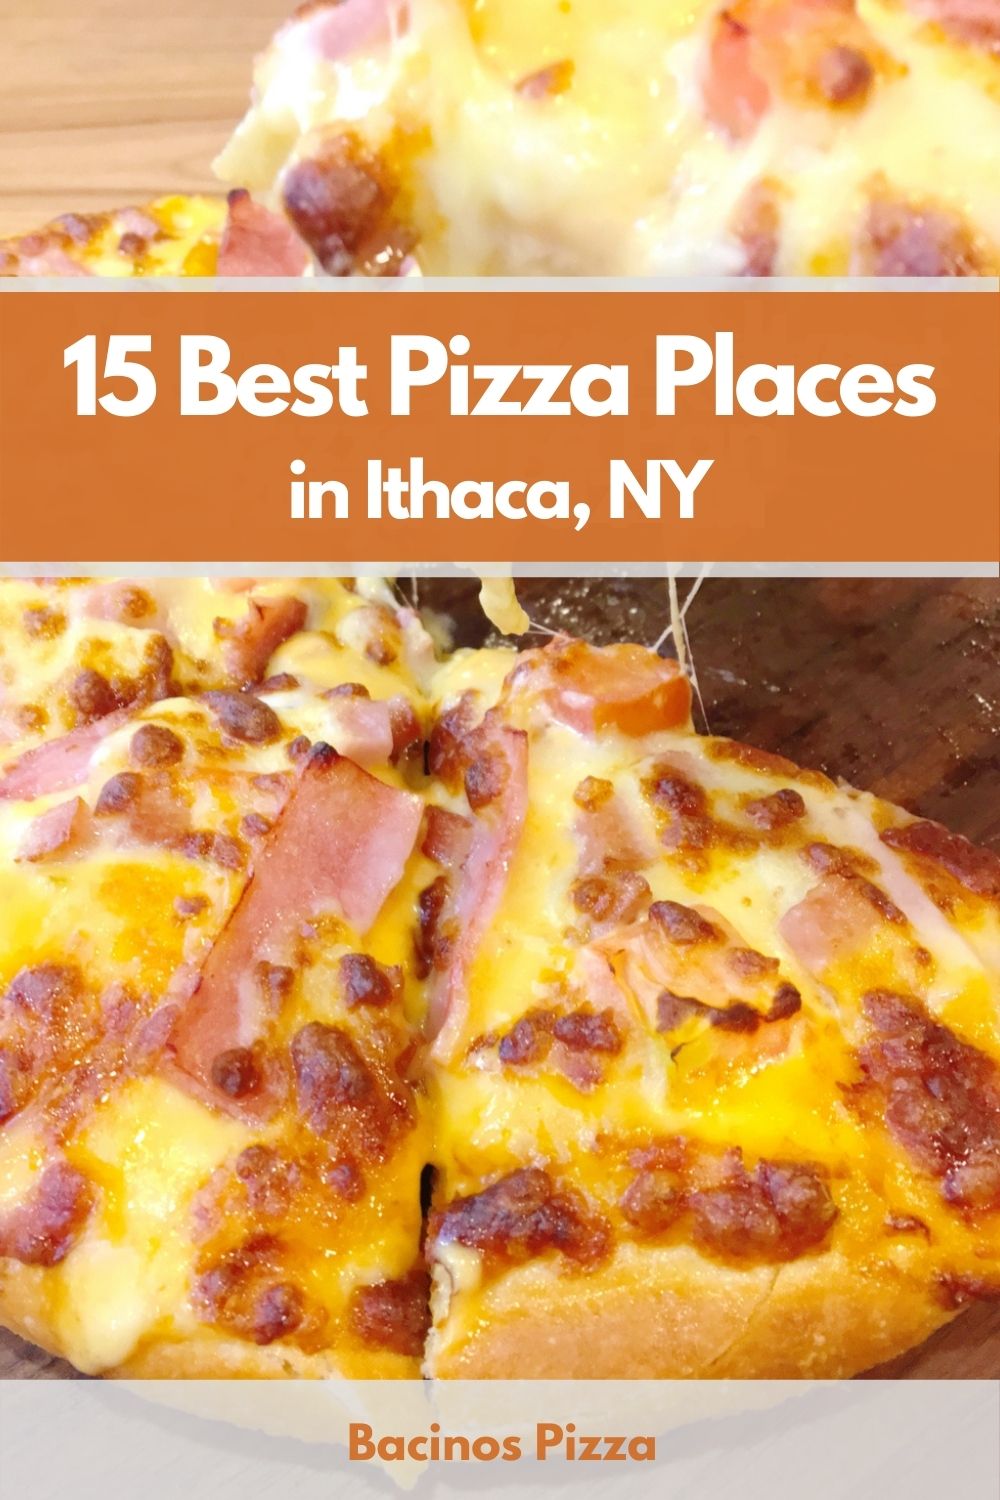 15 Best Pizza Places in Ithaca, NY pin